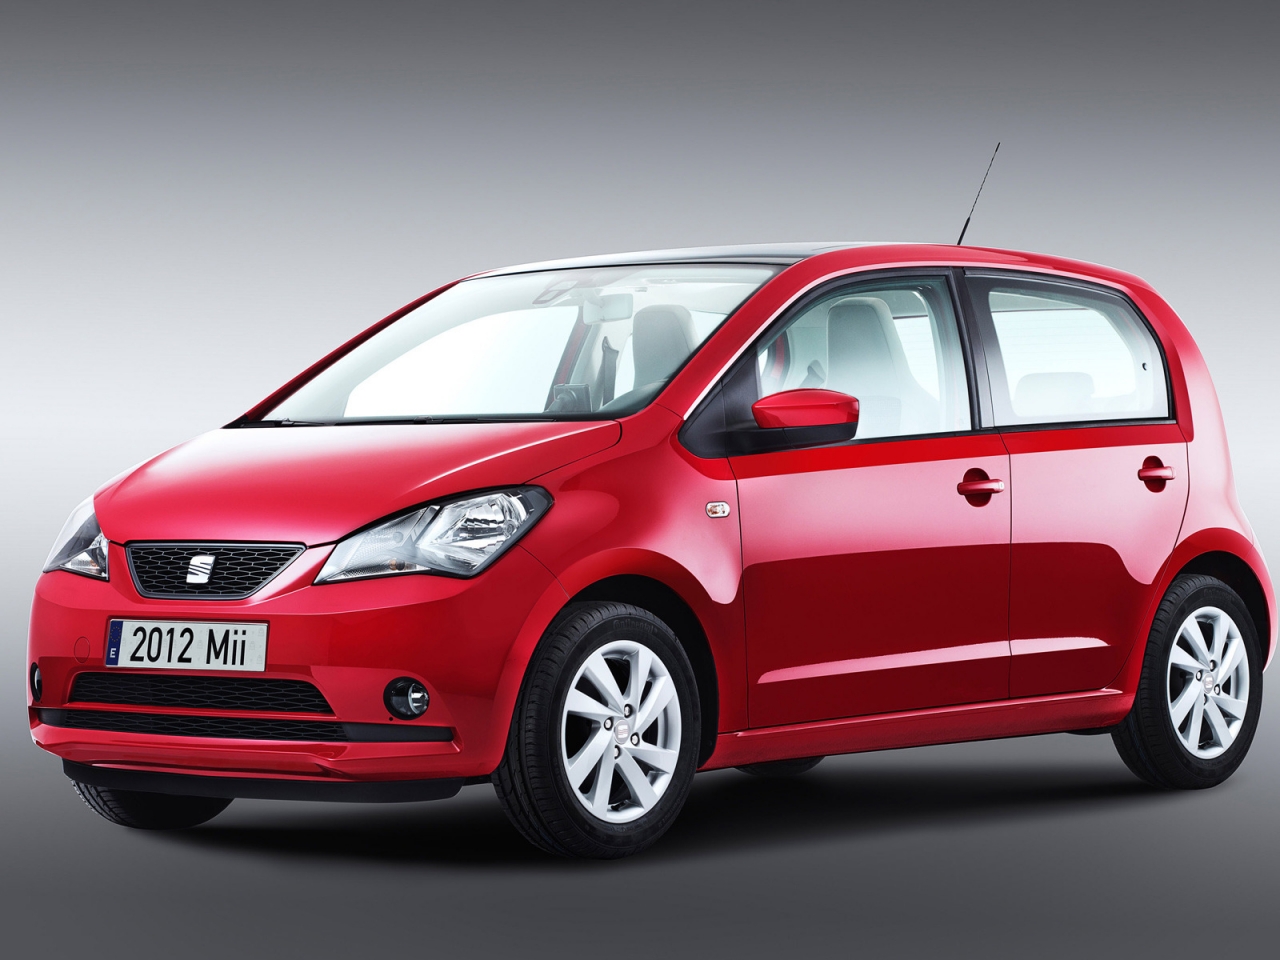 Red Seat Mii Model 2012 for 1280 x 960 resolution